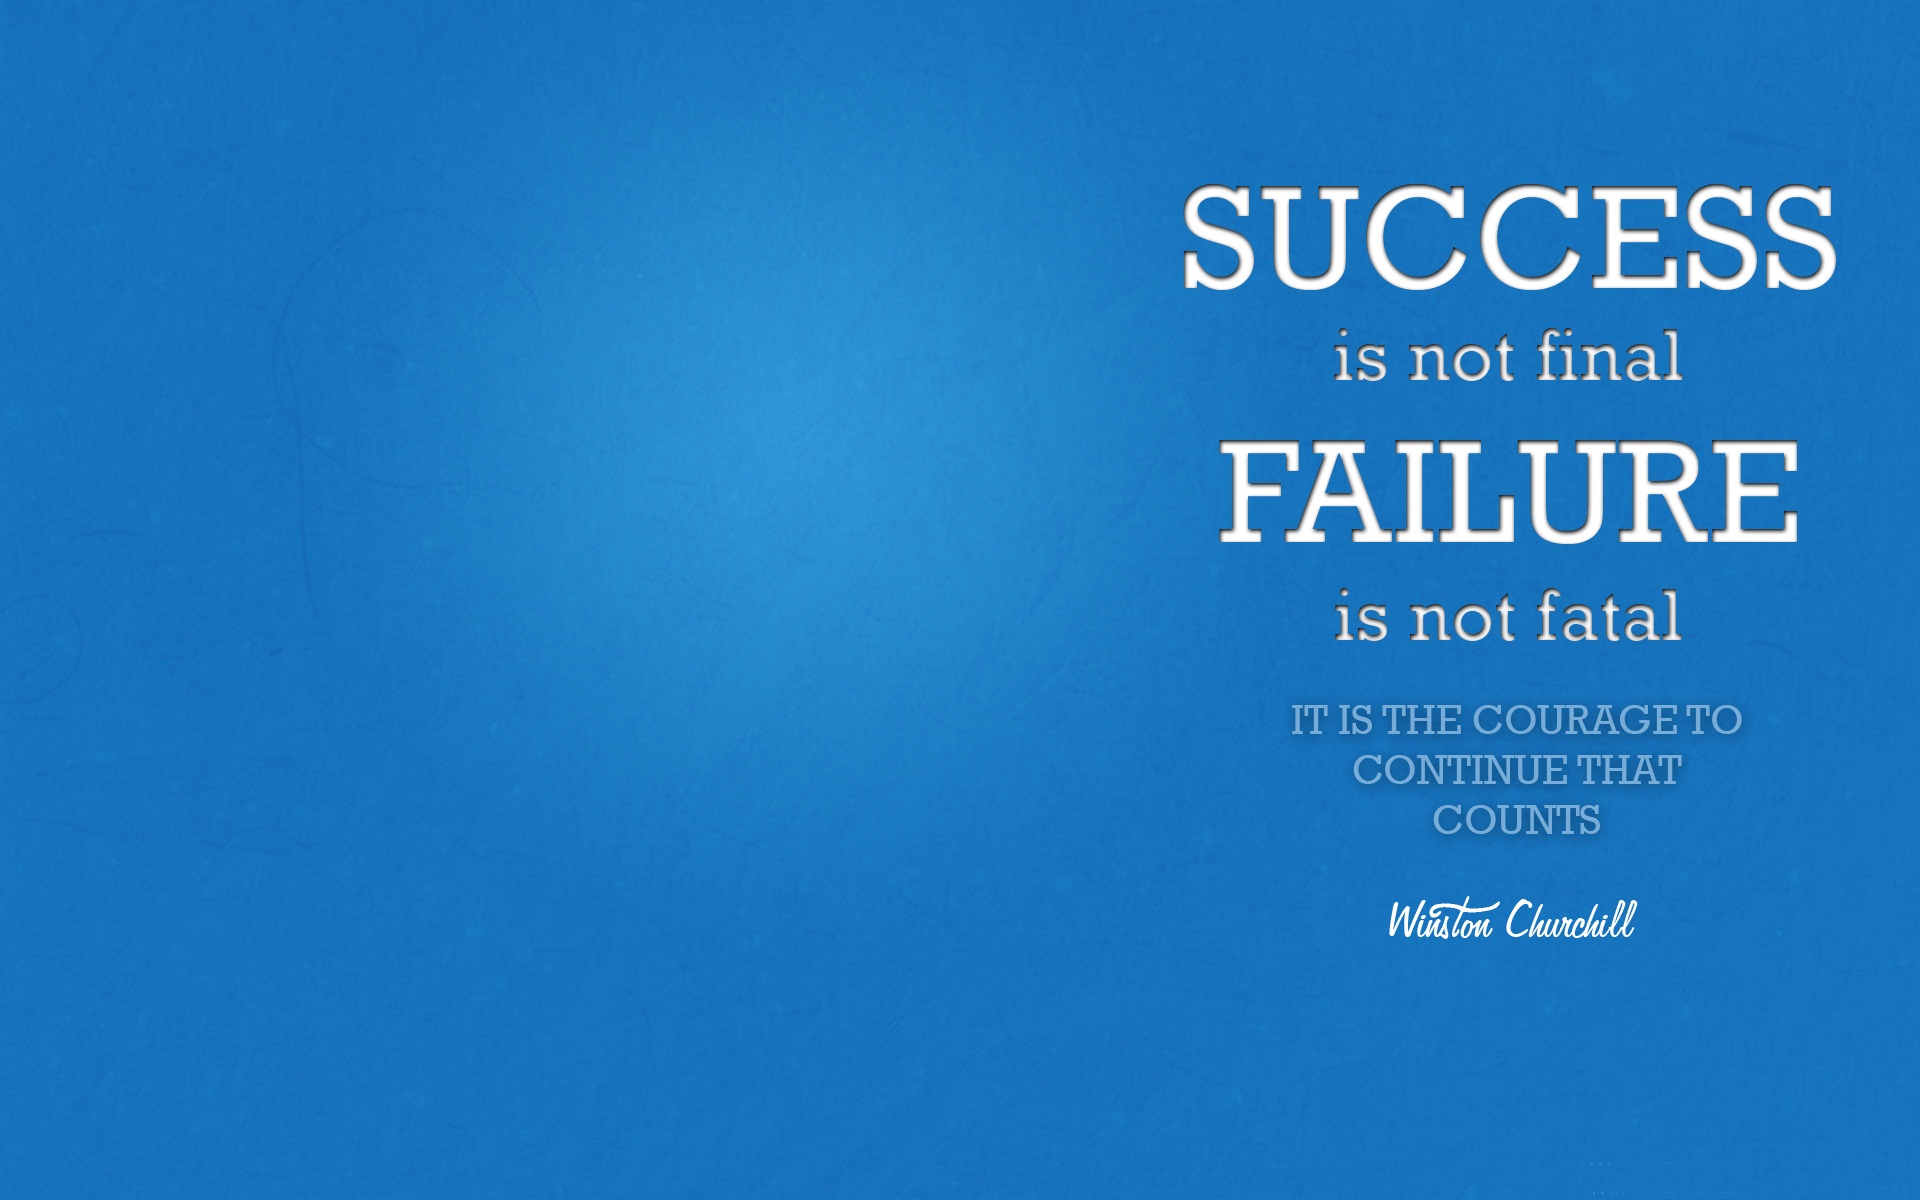 Success Quote Wallpaper By Winston Churchill: Success is not final failure is not fatal